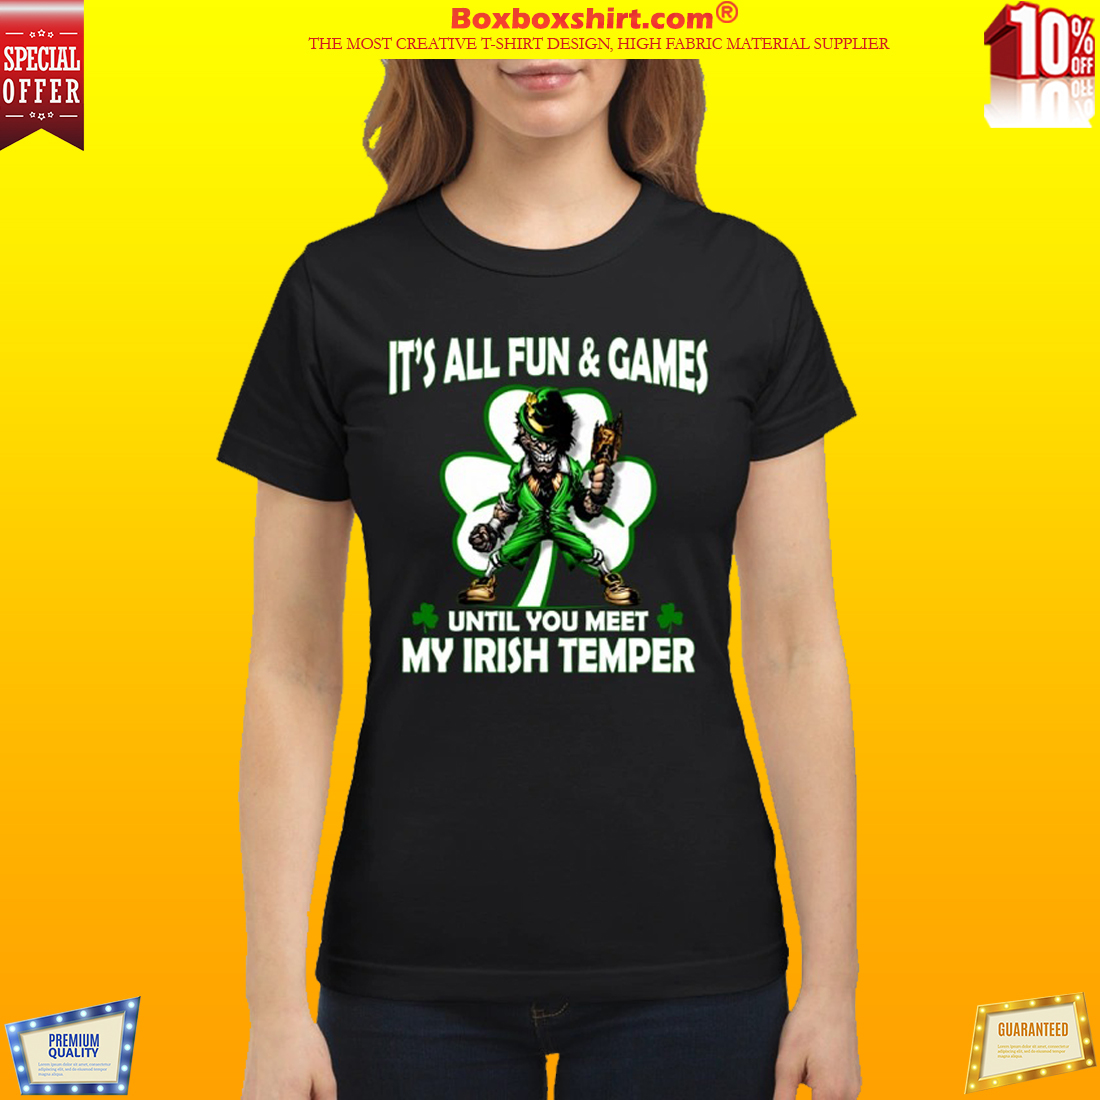 It's all fun and game until you meet my Irish temper classic shirt